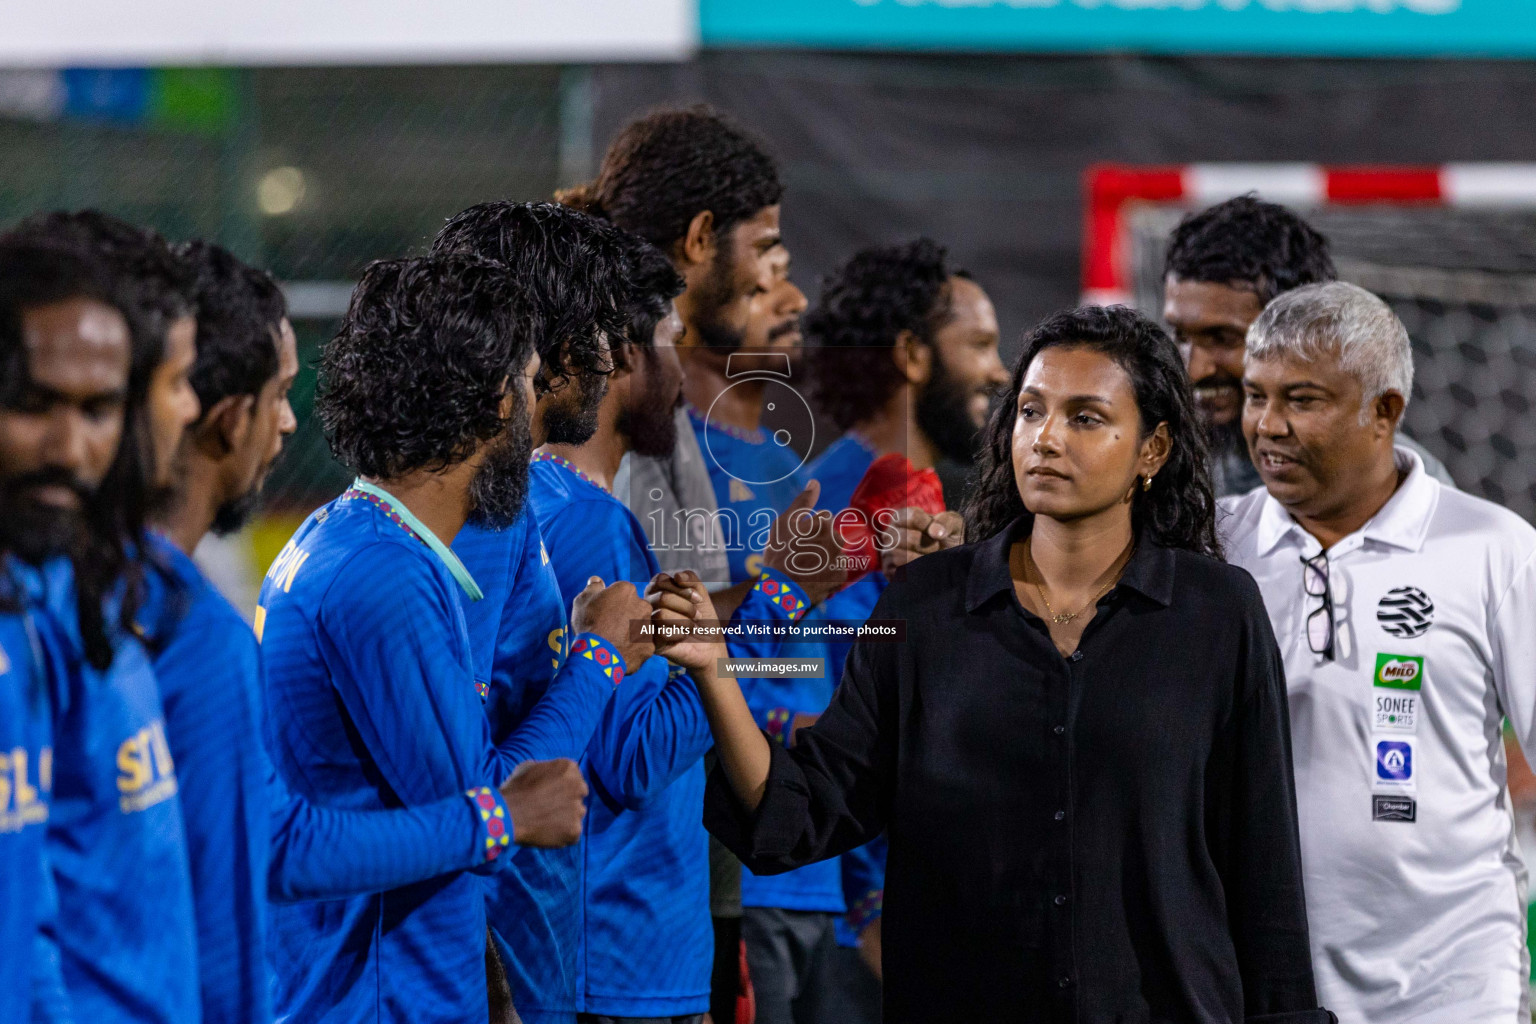 Stelco Club vs Club Fen in Round of 16 of Club Maldives Cup 2022 was held in Hulhumale', Maldives on Tuesday, 25th October 2022. Photos: Ismail Thoriq / images.mv